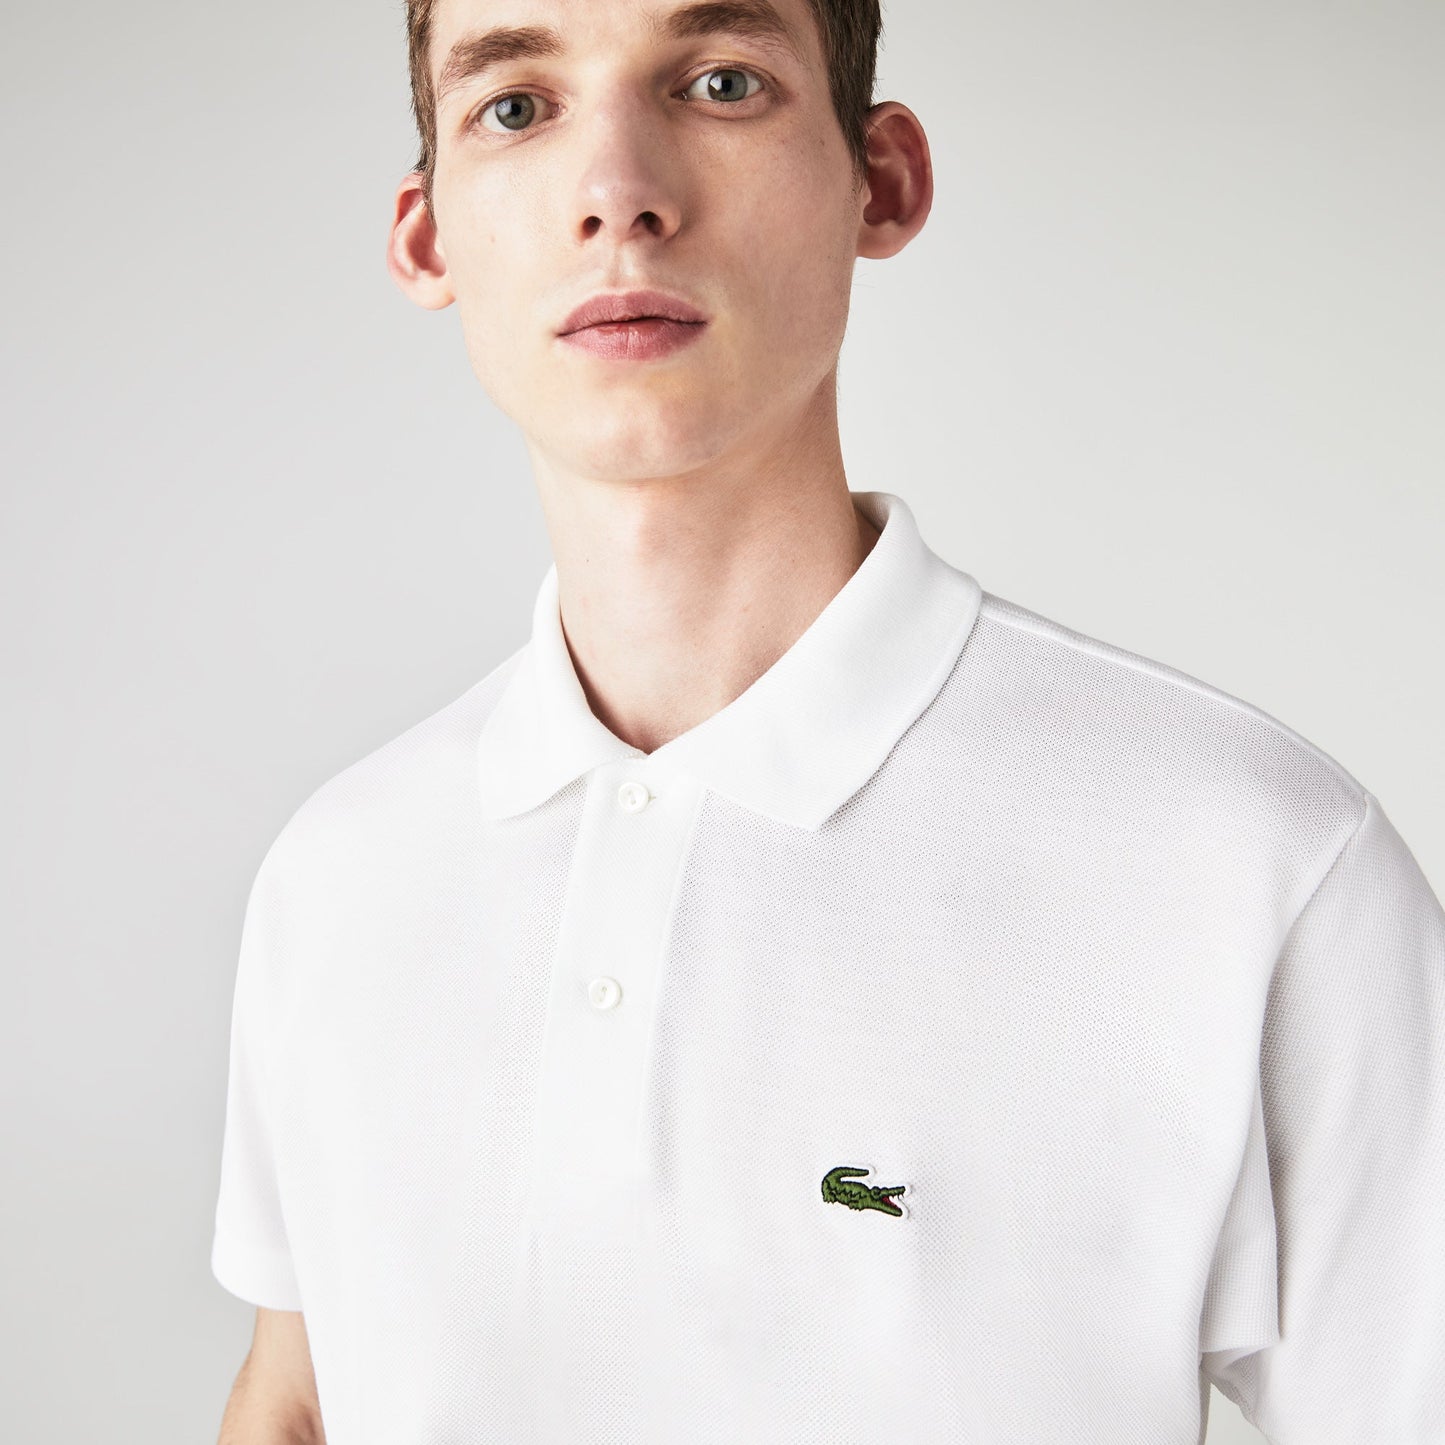 Yellow cotton classic fit polo Lacoste - L1212/107